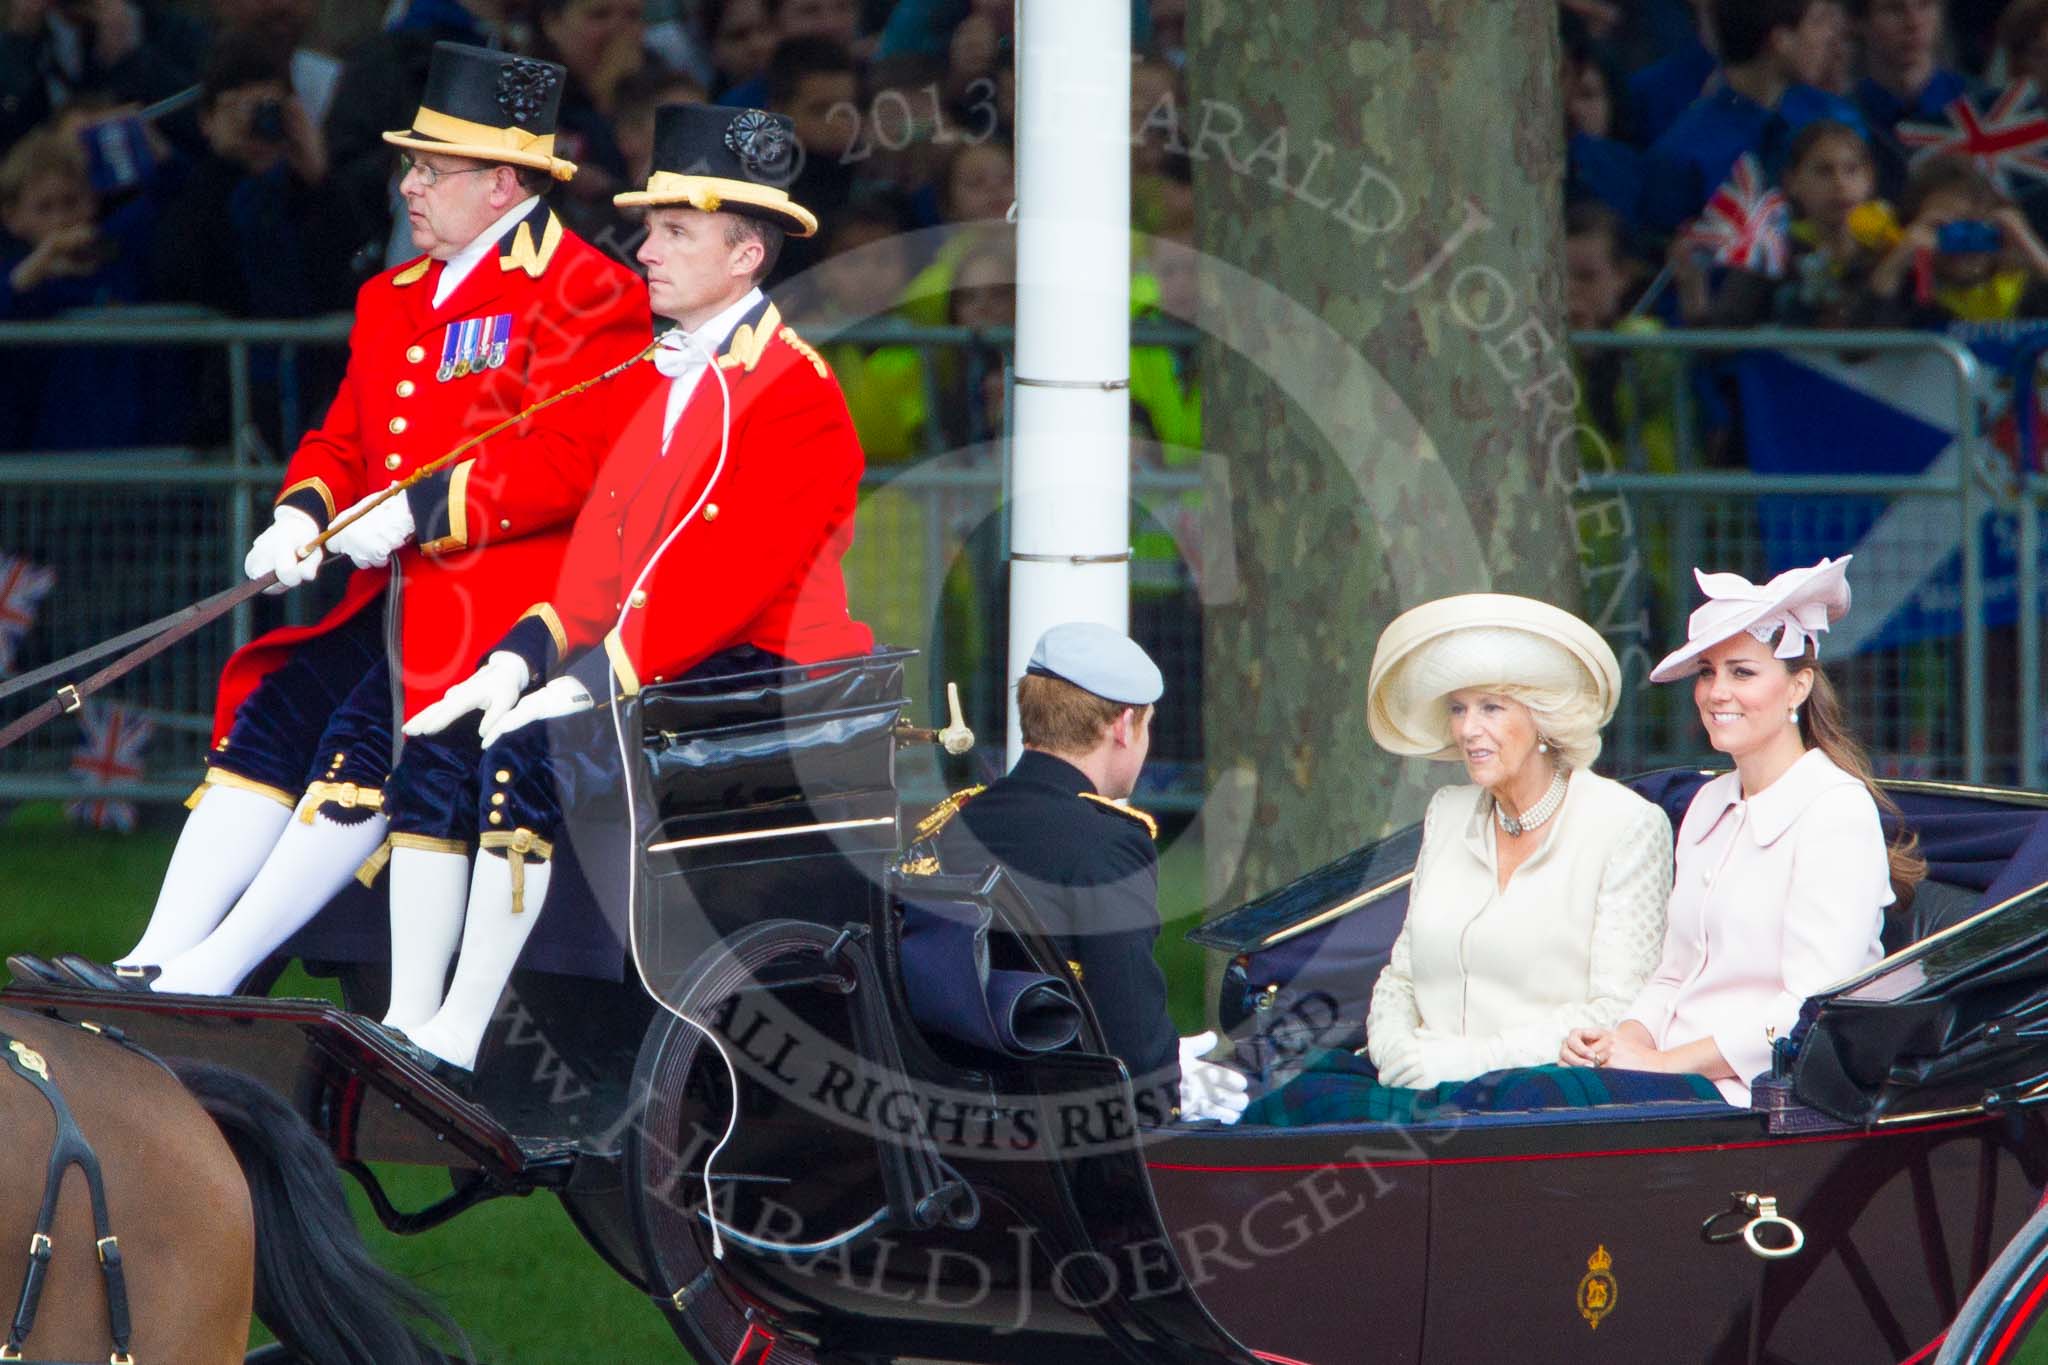 Trooping the Colour 2013: HRH Prince Harry of Wales, HRH The Duchess of Cornwall  and HRH The Duchess of Cambridge in the first barouche carriage on the way across Horse Guards Parade to watch the parade from the Major General's office. Image #184, 15 June 2013 10:49 Horse Guards Parade, London, UK